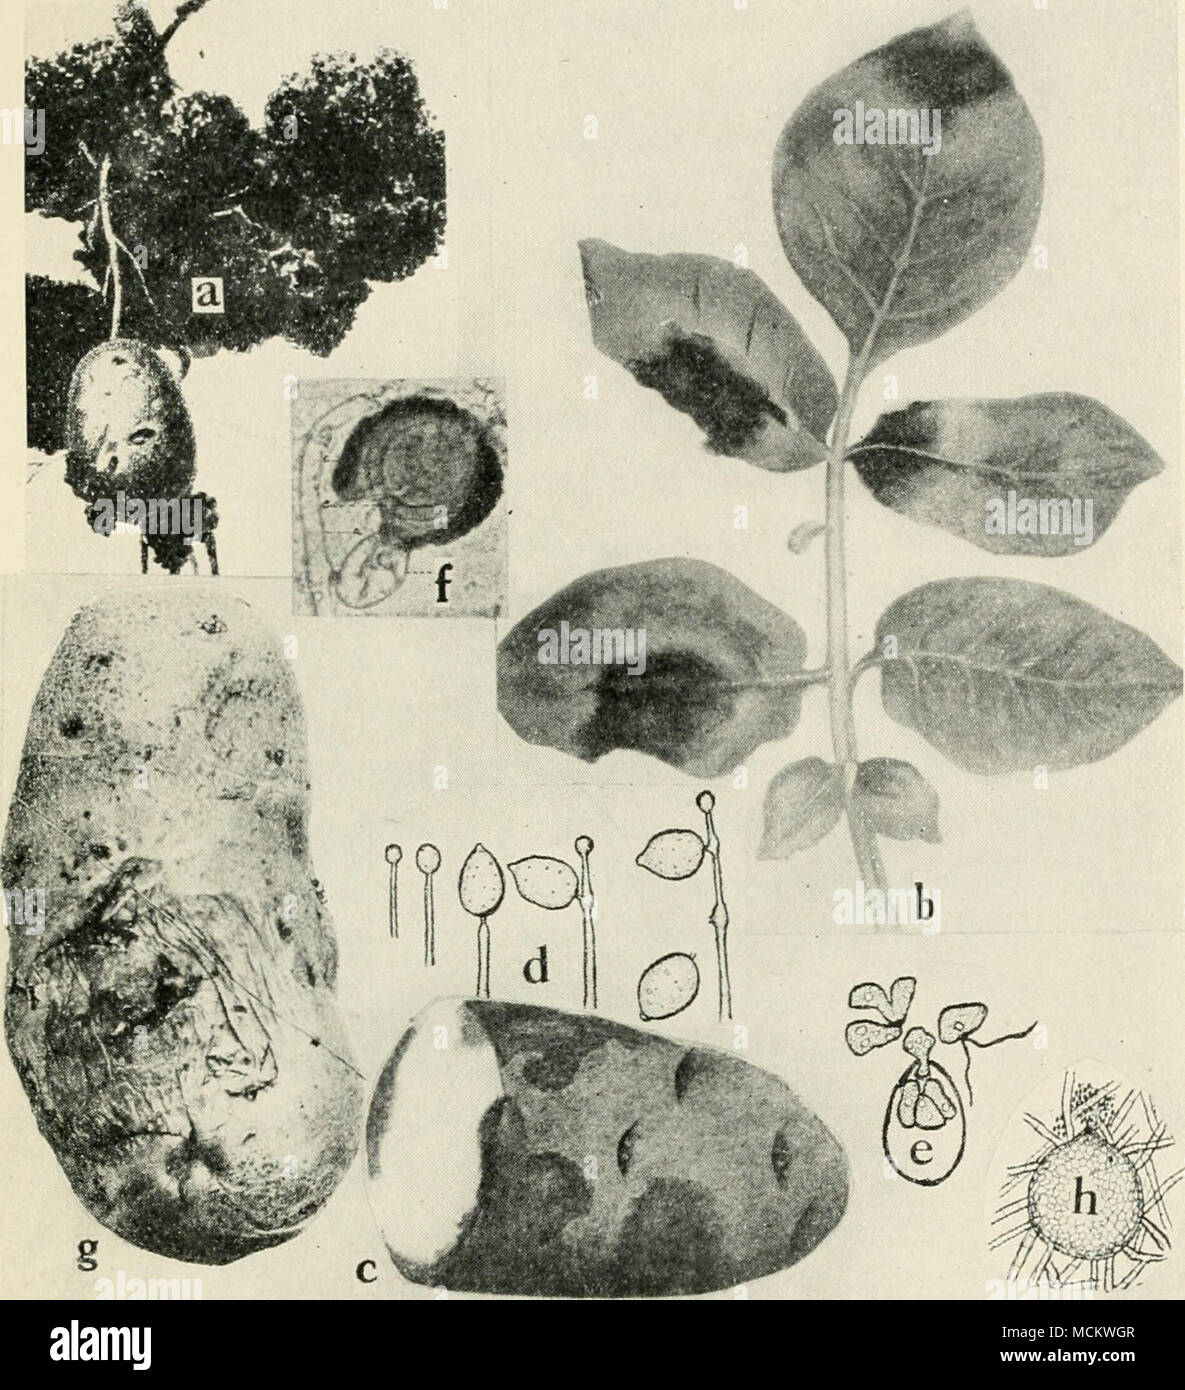 . Fig. 6i. Potato Diseases. a. Black wart (after Gussow), b. late blight on foliage, c. late blight on tuber, d. successive stages of the development of the conidia of Phyiophthora infestans (b. and d. after L. R. Jones), e. germination of conidia of Phytophlhora infestayis, bv means of zoopores (after Ward),/, mature oogonium of P. infestans (after Clinton)'. R. melters. surface view, early stage of infection, h. pycnidium of Phoma tuberose (after Melhus and Rosenbaum). Stock Photo